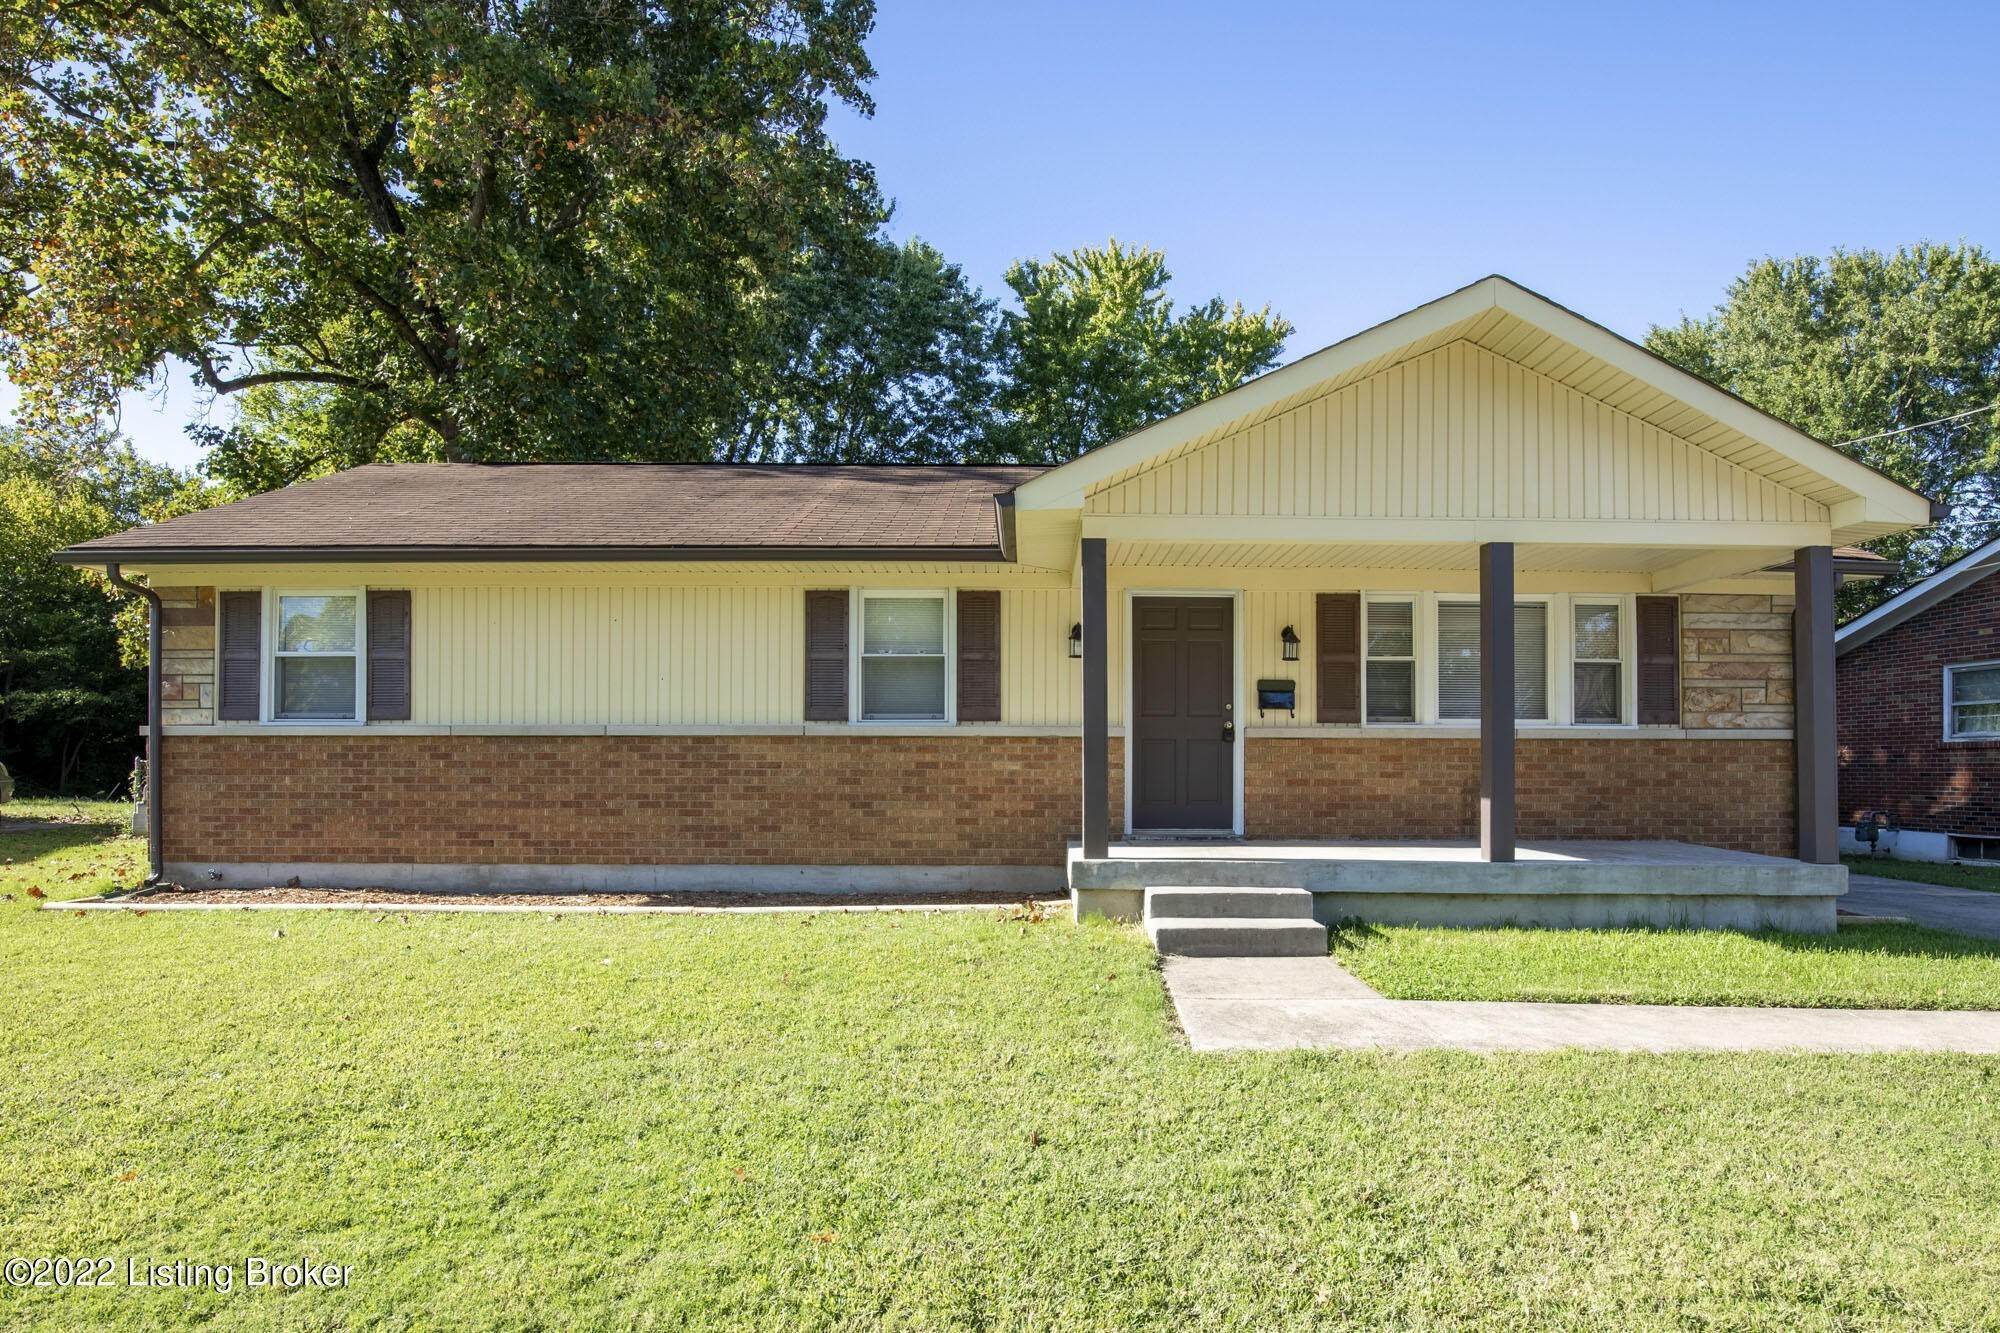 1. Single Family at Louisville, KY 40216